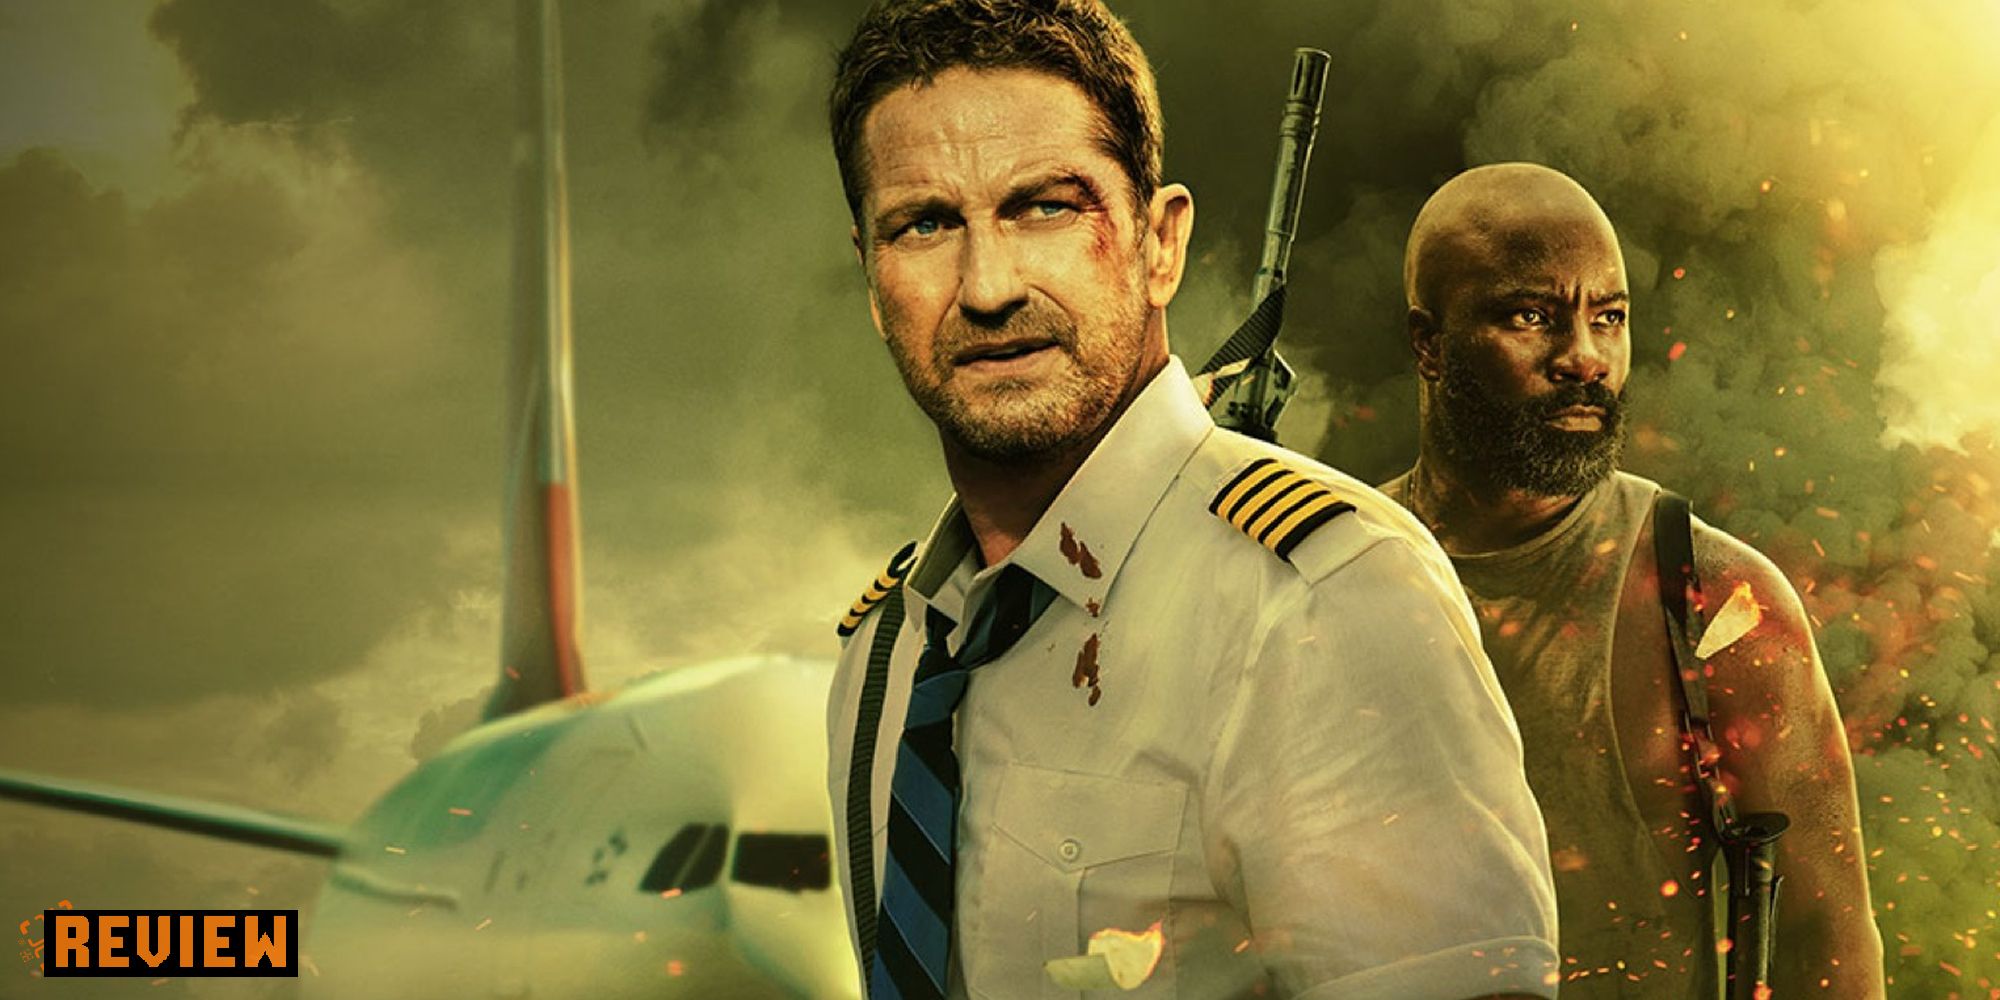 Plane Review - A Turbulent Ride That Doesn't Stick The Landing